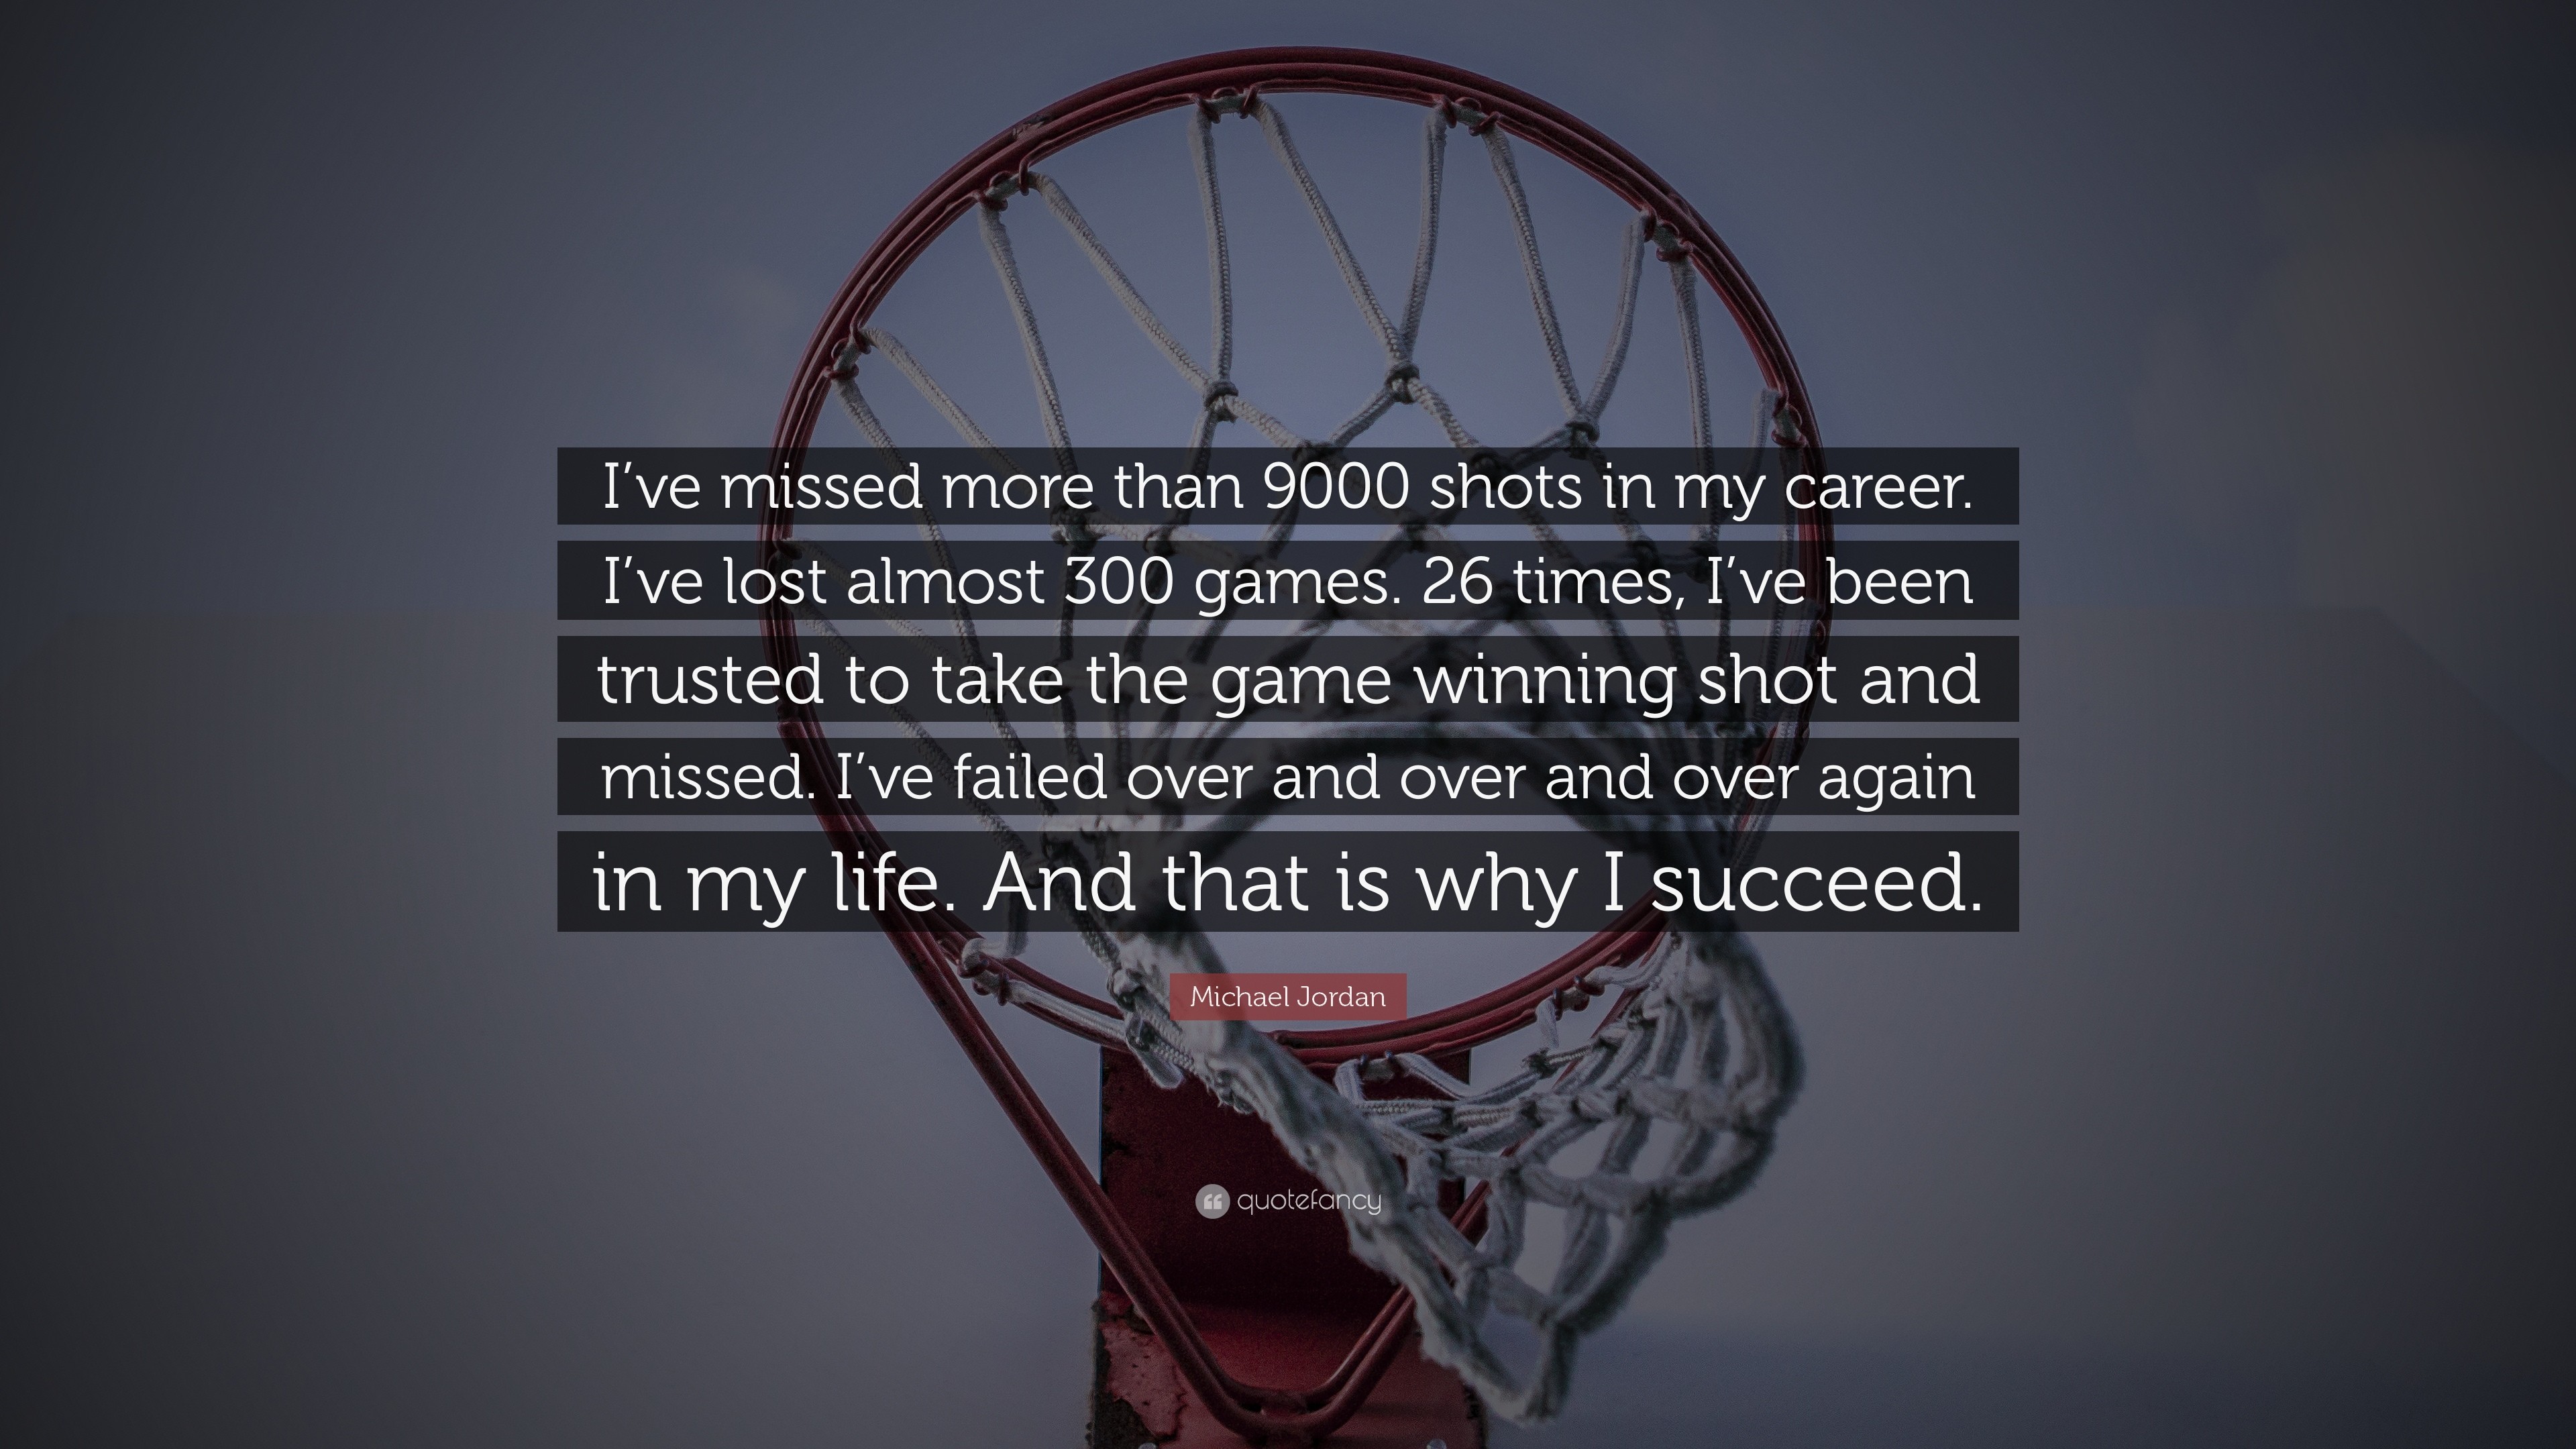 3840x2160 Michael Jordan Quote: “I've missed more than 9000 shots in my career